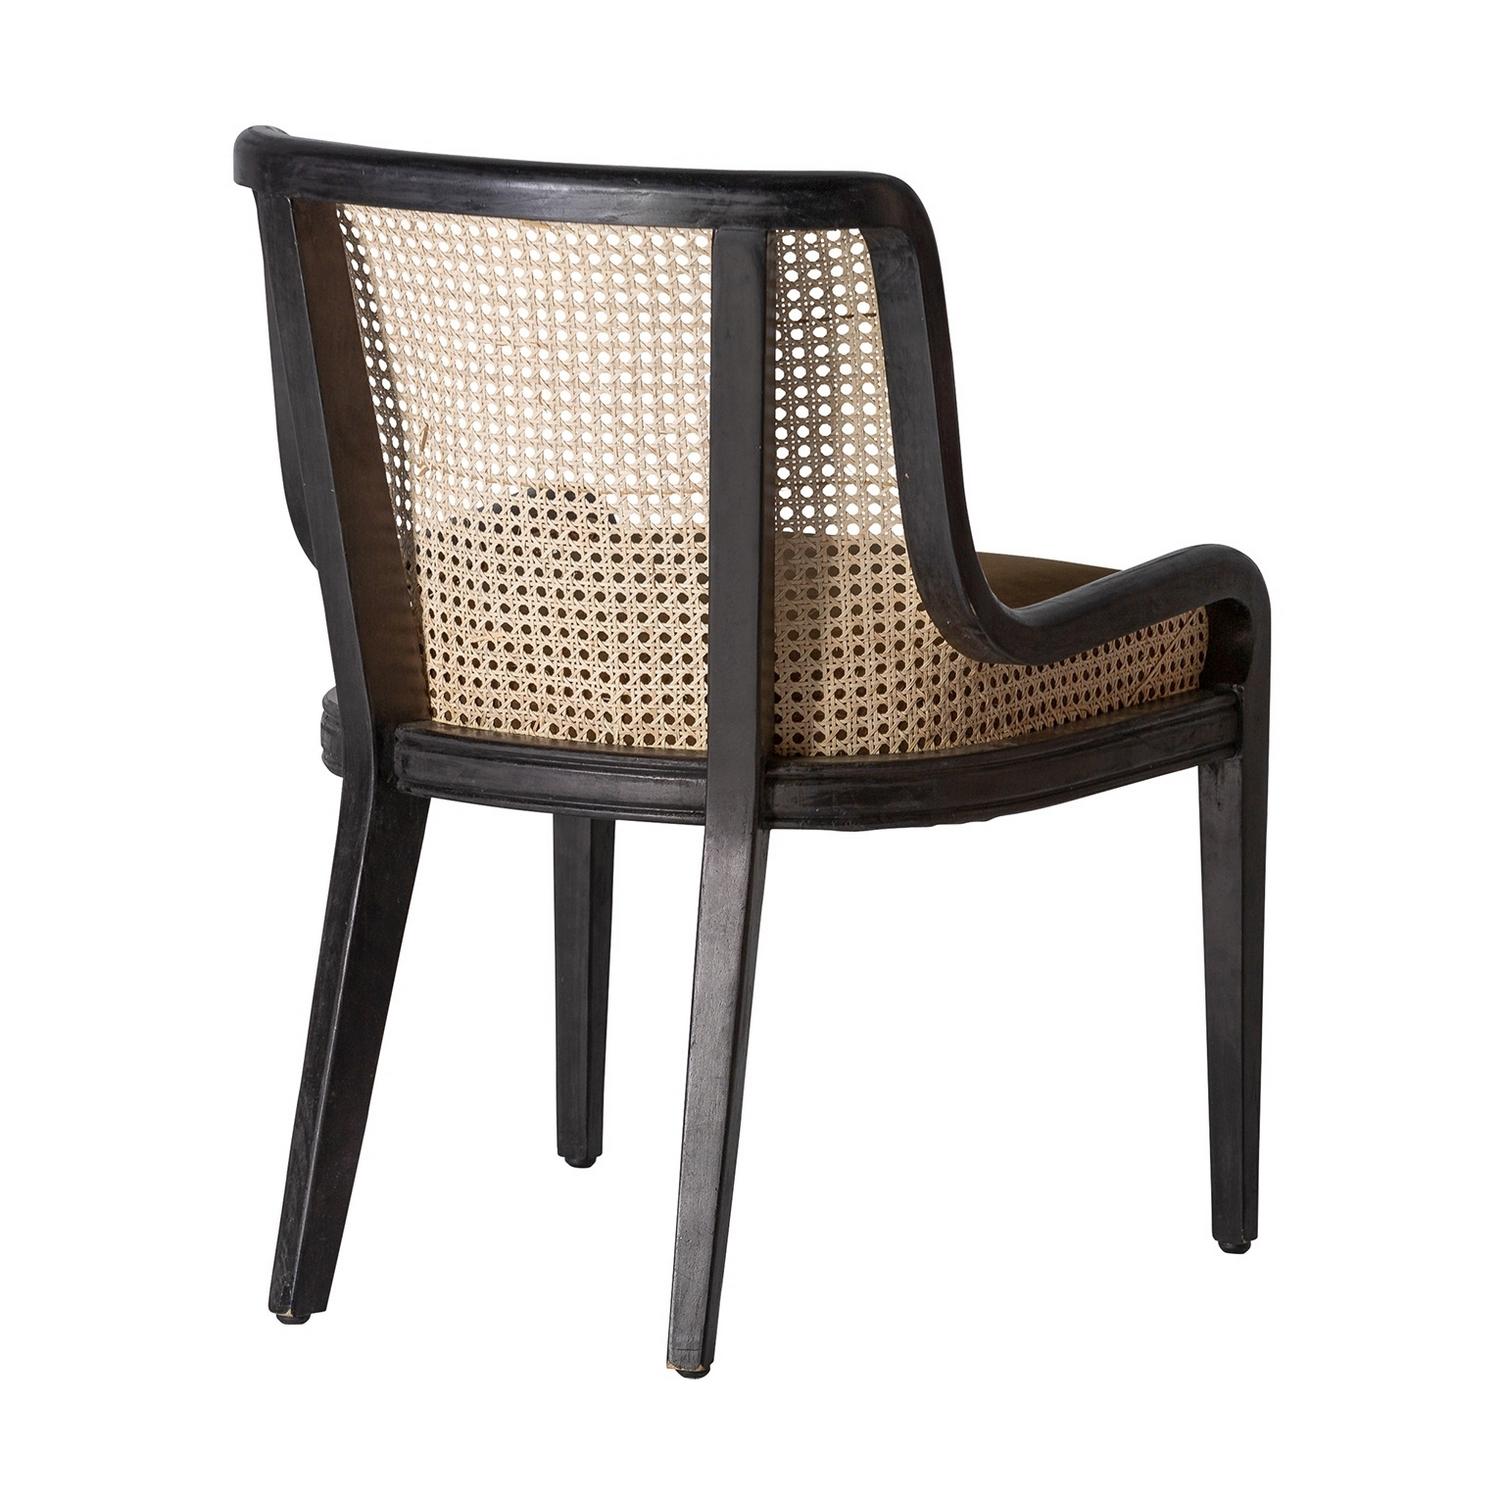 MCM Design style black lacquered and curved wooden structure adorned with a rattan wicker cane back and velvet seat. Around the dining table, it will be perfect around your desk too!